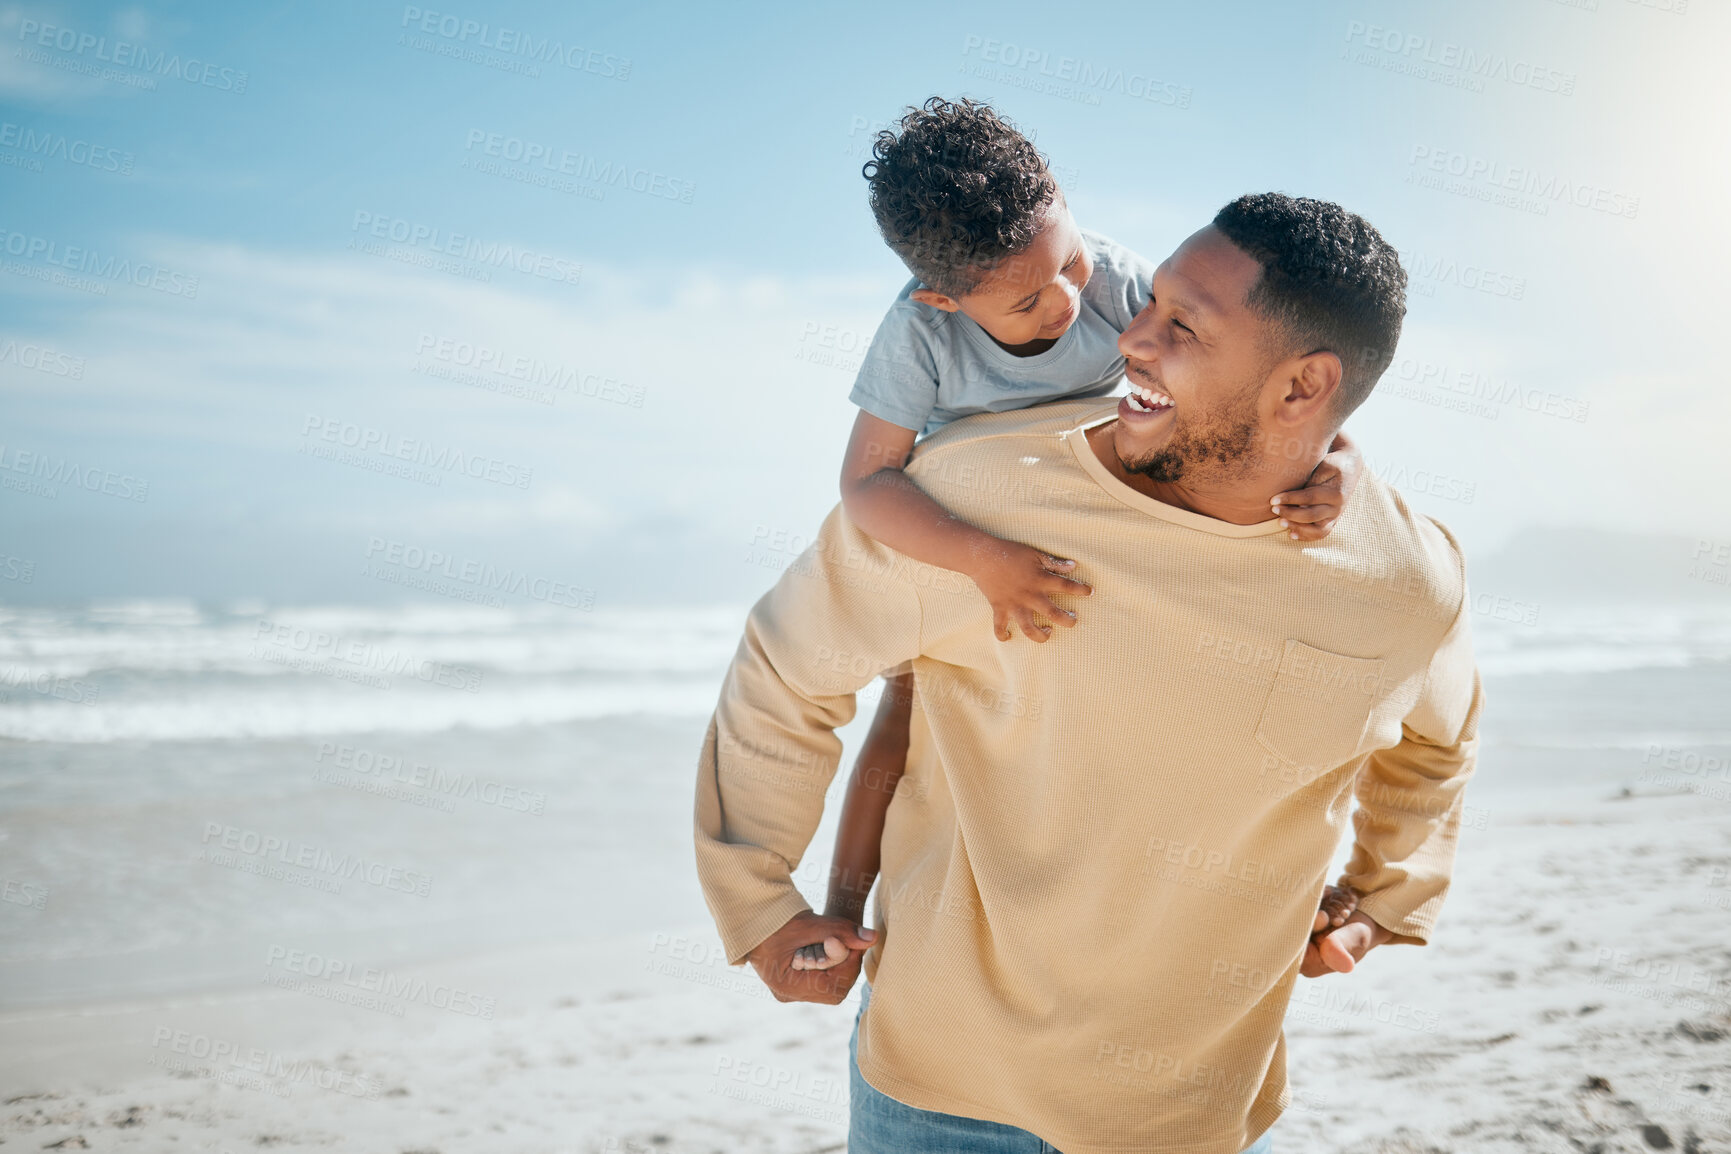 Buy stock photo Cheerful young mixed race father giving his son a piggyback ride on his back having fun and spending time together while on vacation by the beach